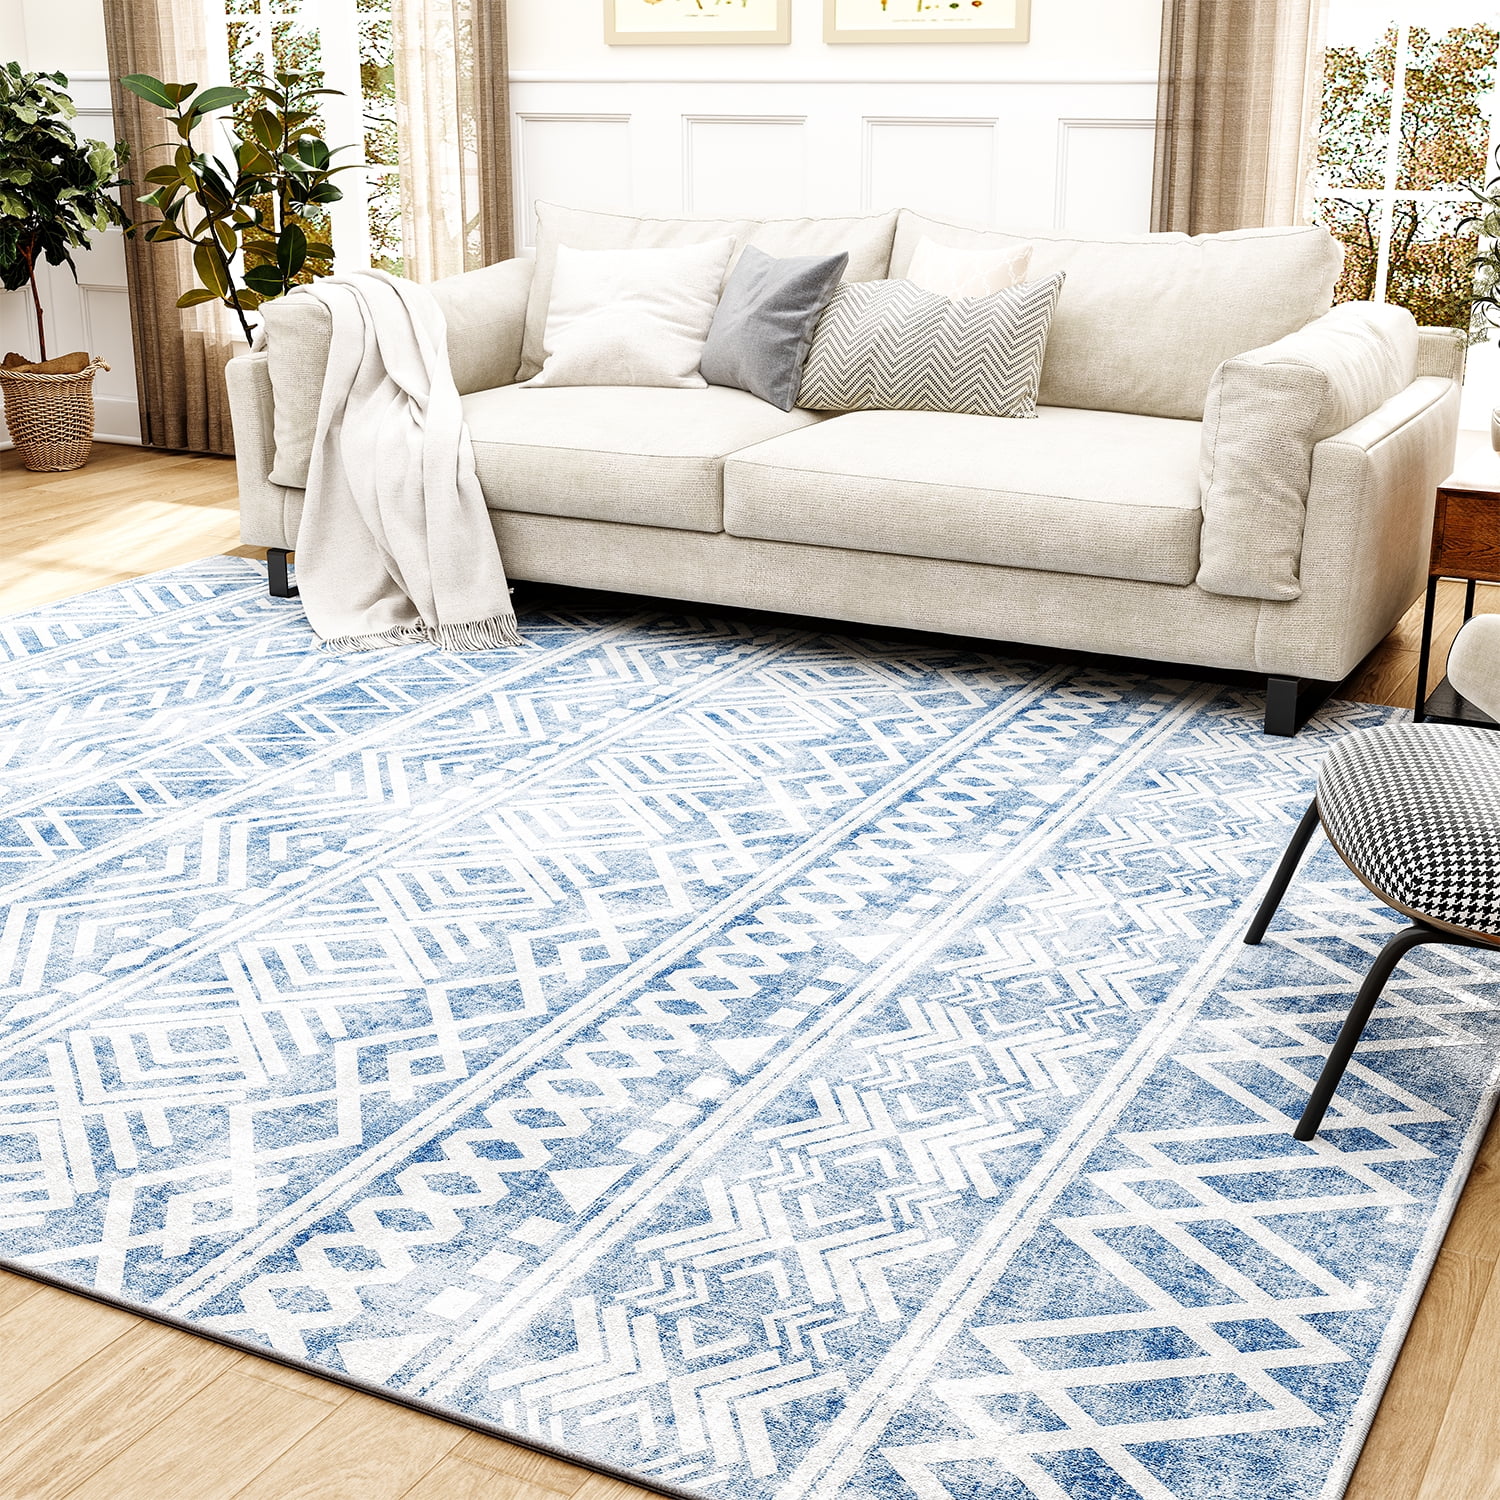 Walmart's Outdoor Rugs Are Marked Down to Under $30 – SheKnows